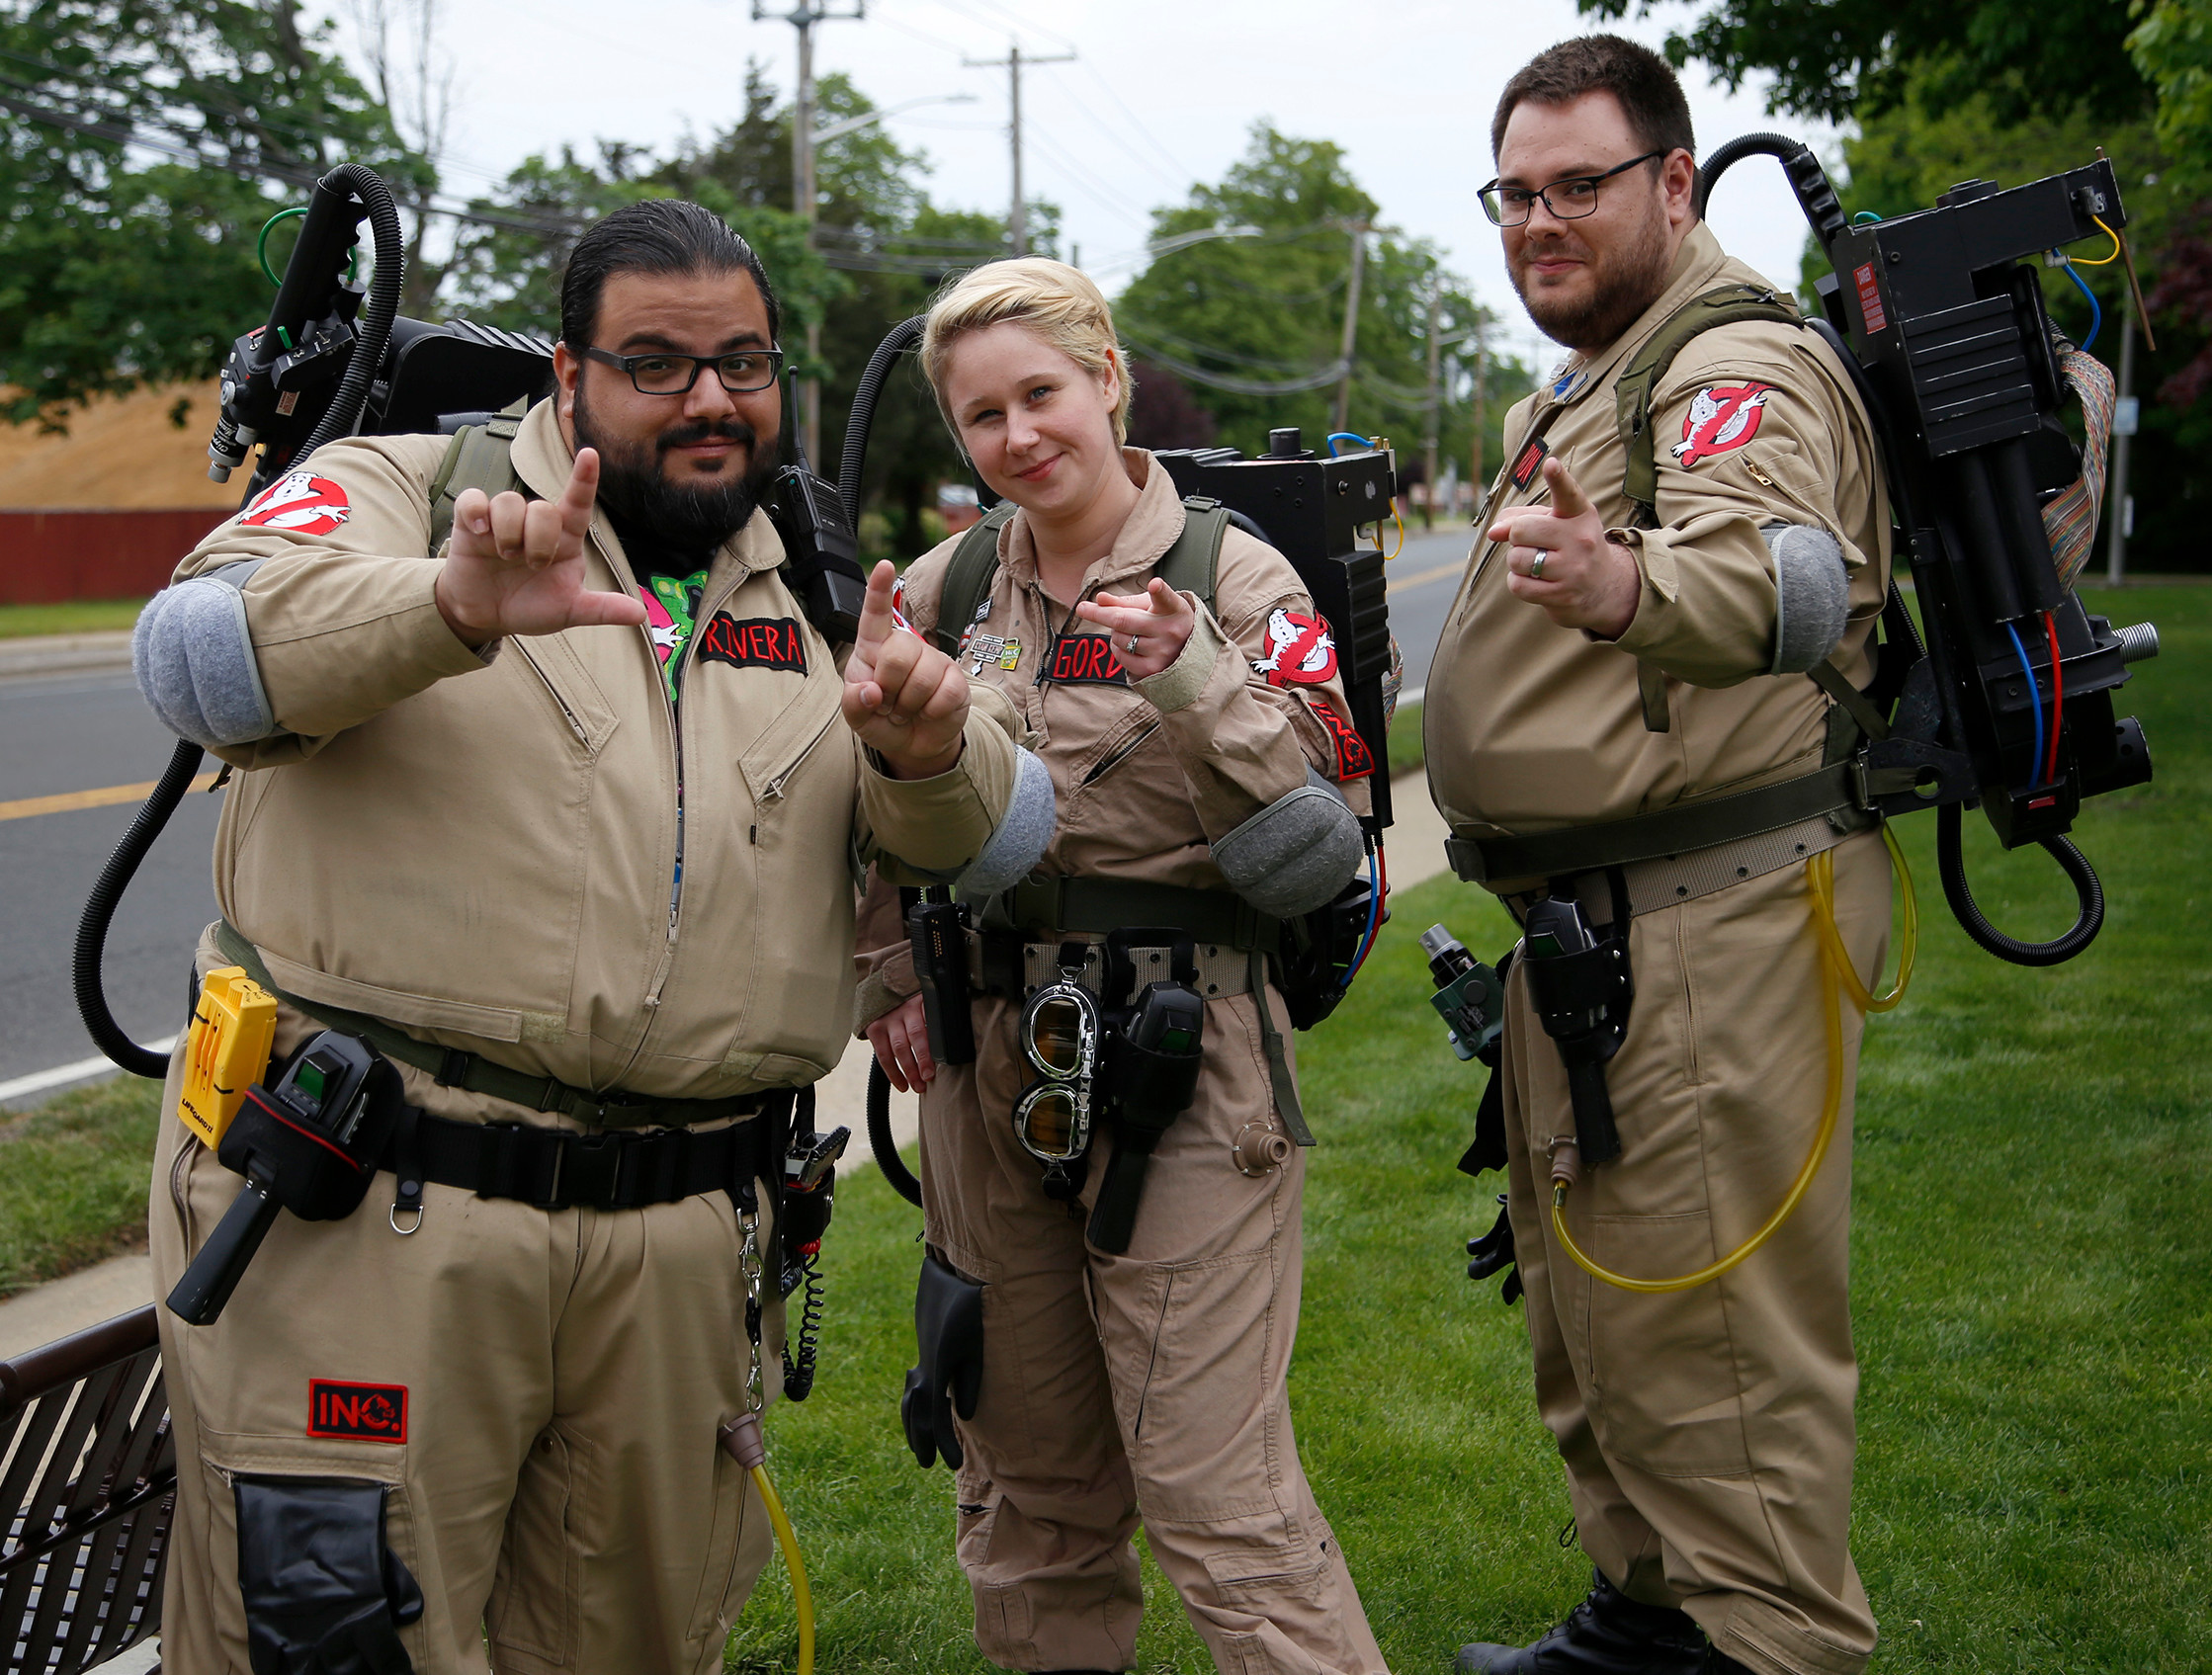 Several members of the official group, The New Ghostbusters of Long Island, visited EMCon, including Charlie Rivera, Valerie Gordon and Sean Gordon.